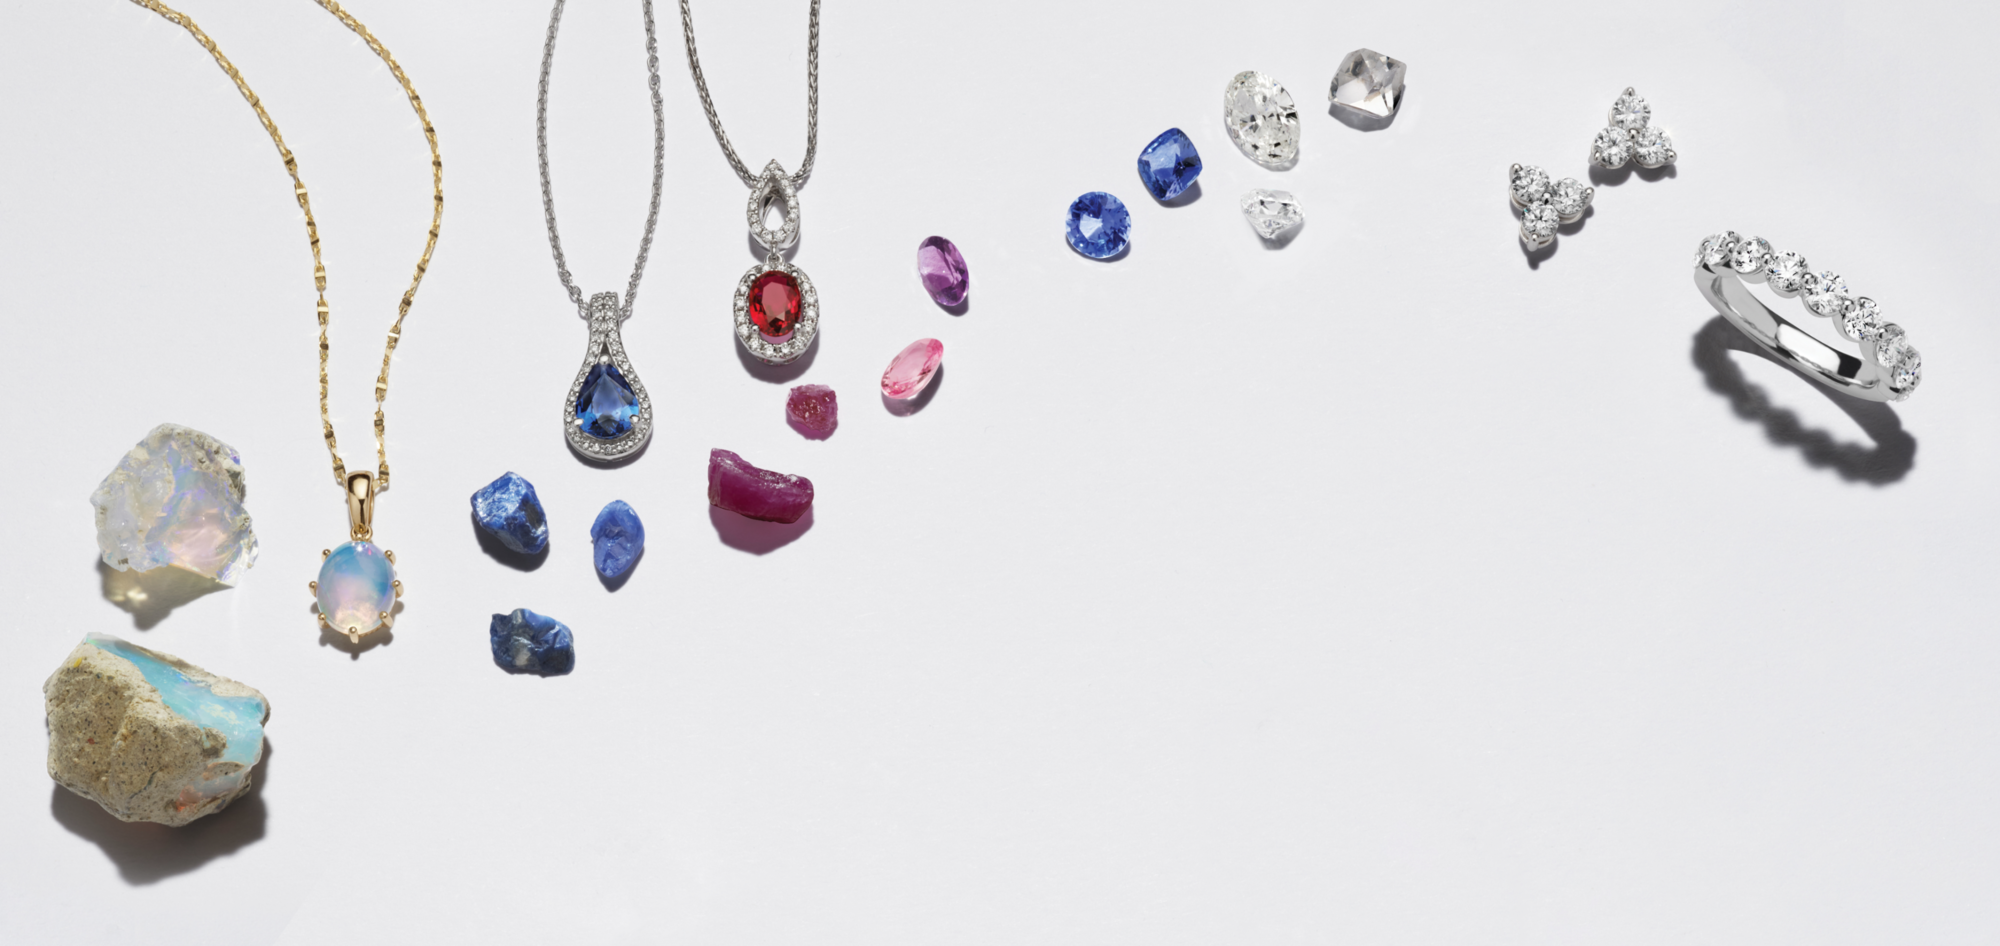 A collection of gemstone jewelry with raw gemstones